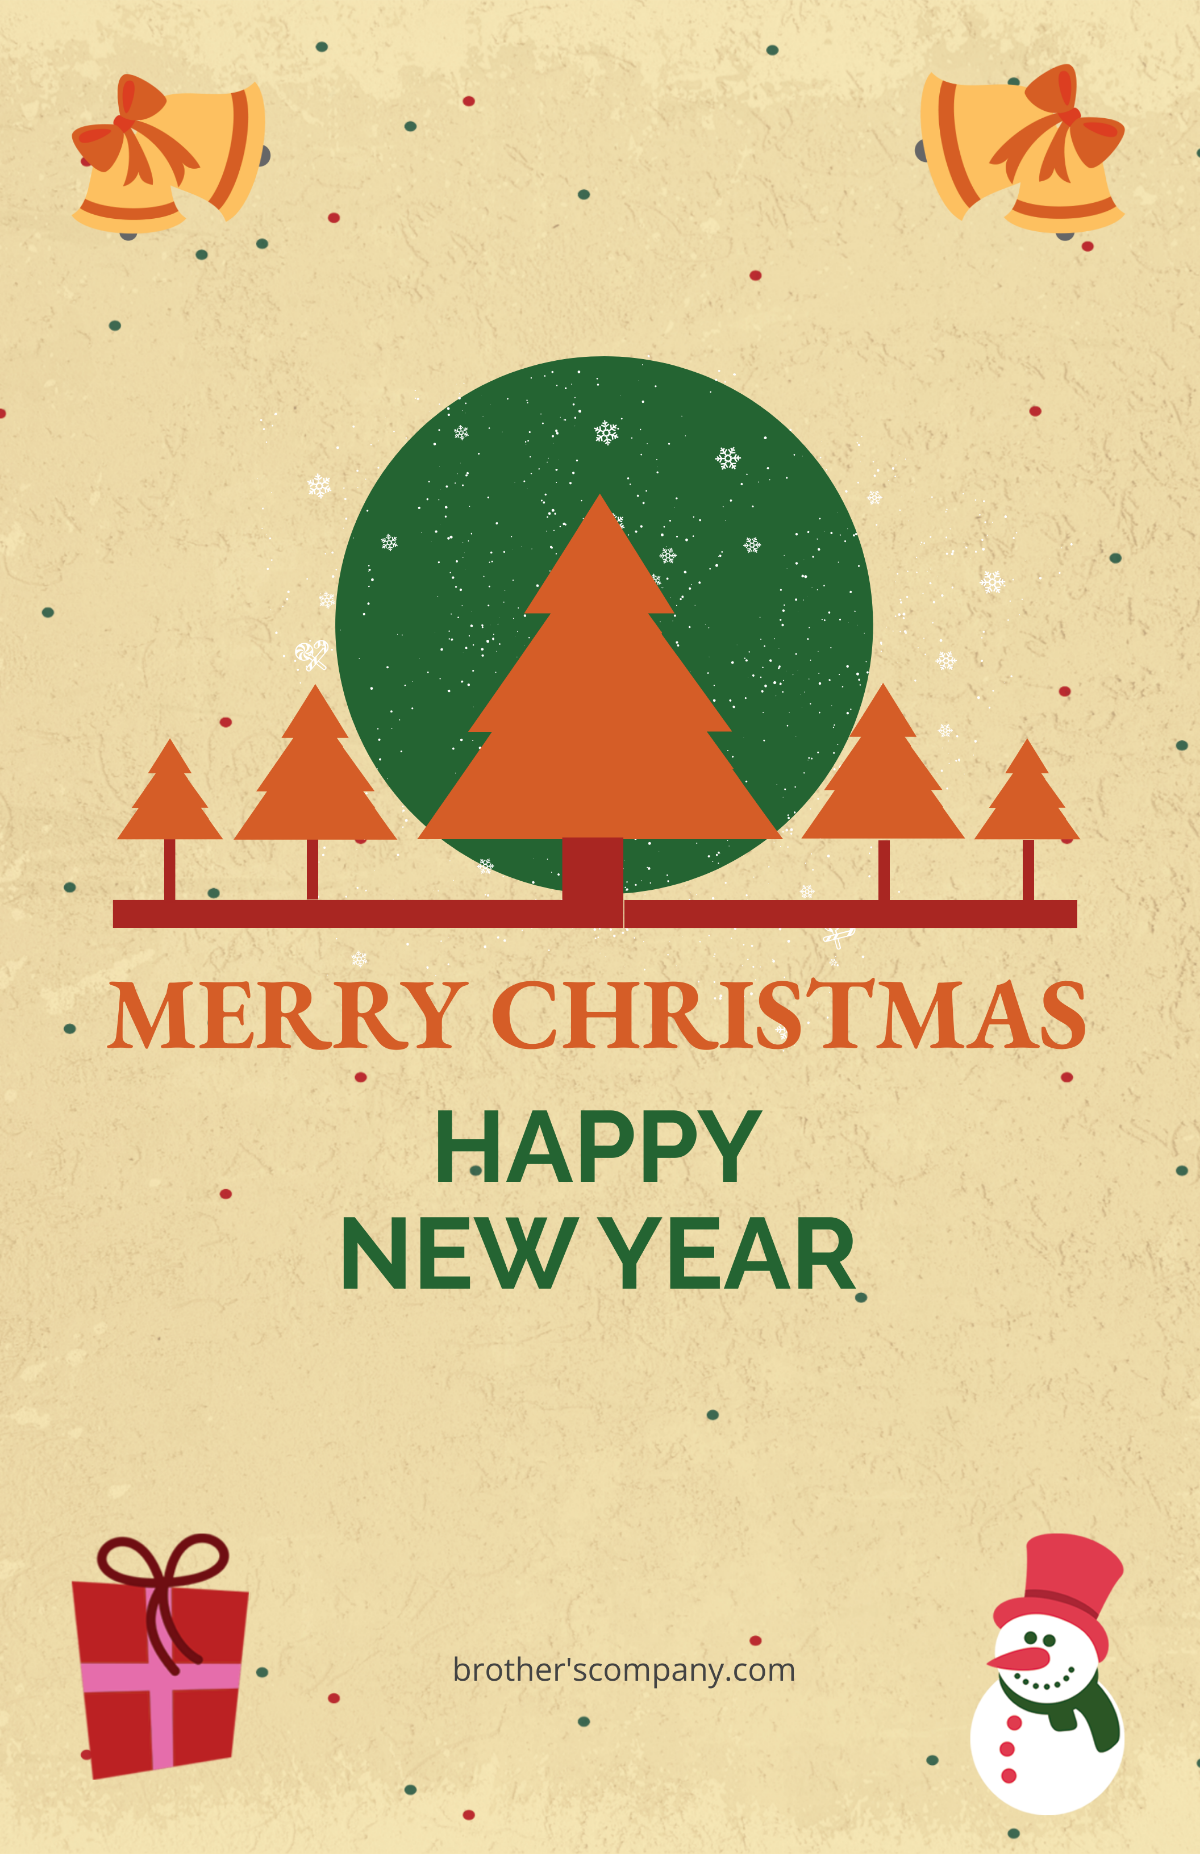 Merry Christmas and New Year Poster Template